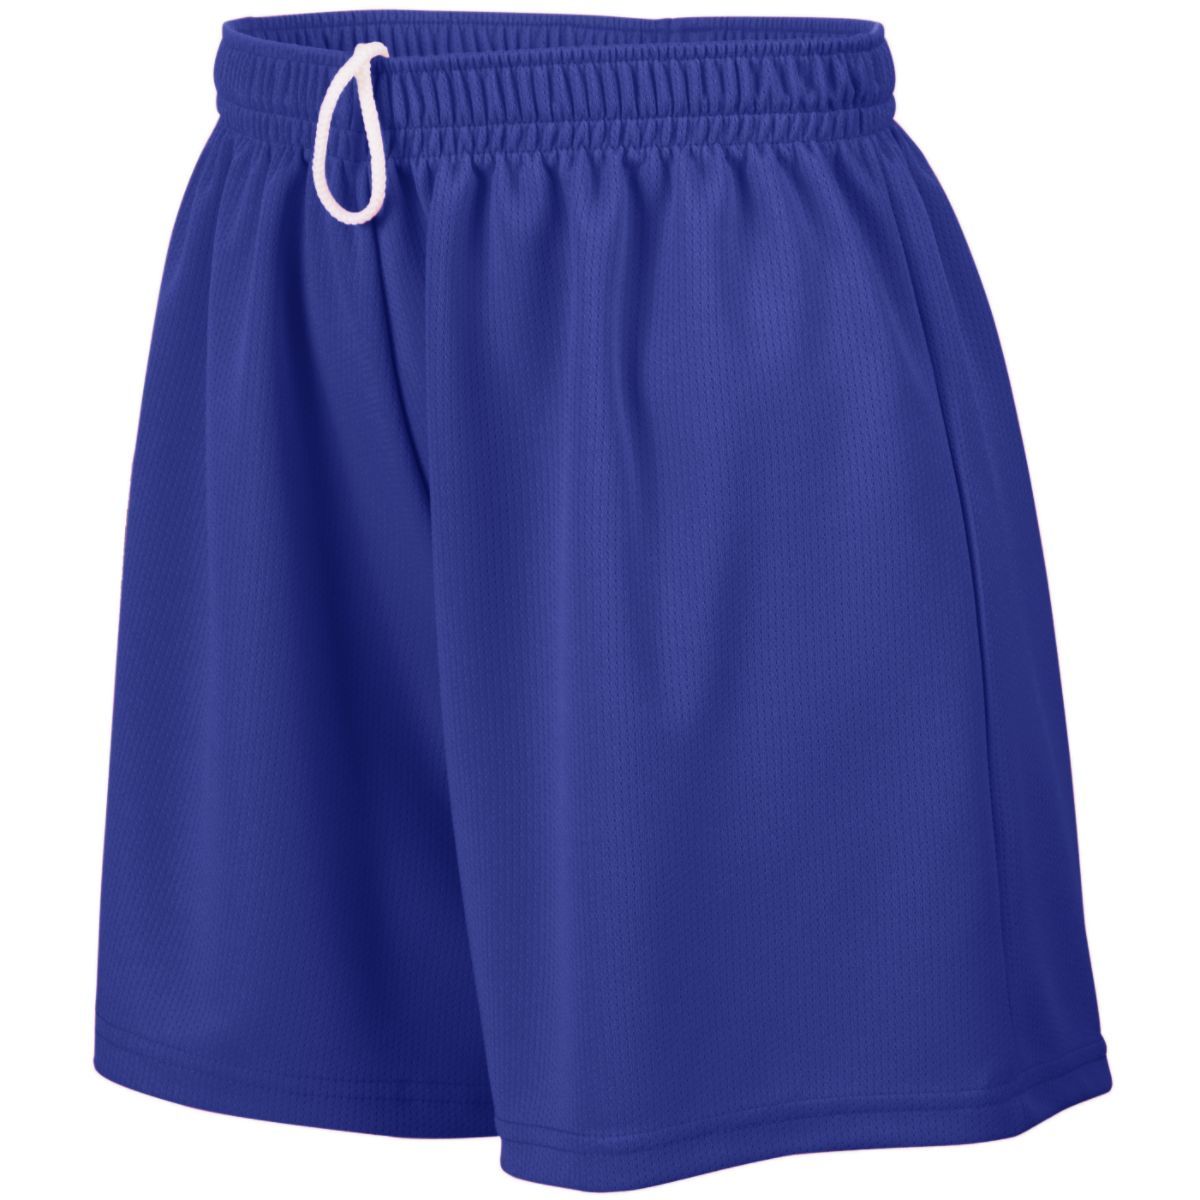 Augusta Sportswear Girls Wicking Mesh Shorts in Purple  -Part of the Girls, Augusta-Products, Lacrosse, Girls-Shorts, All-Sports, All-Sports-1 product lines at KanaleyCreations.com